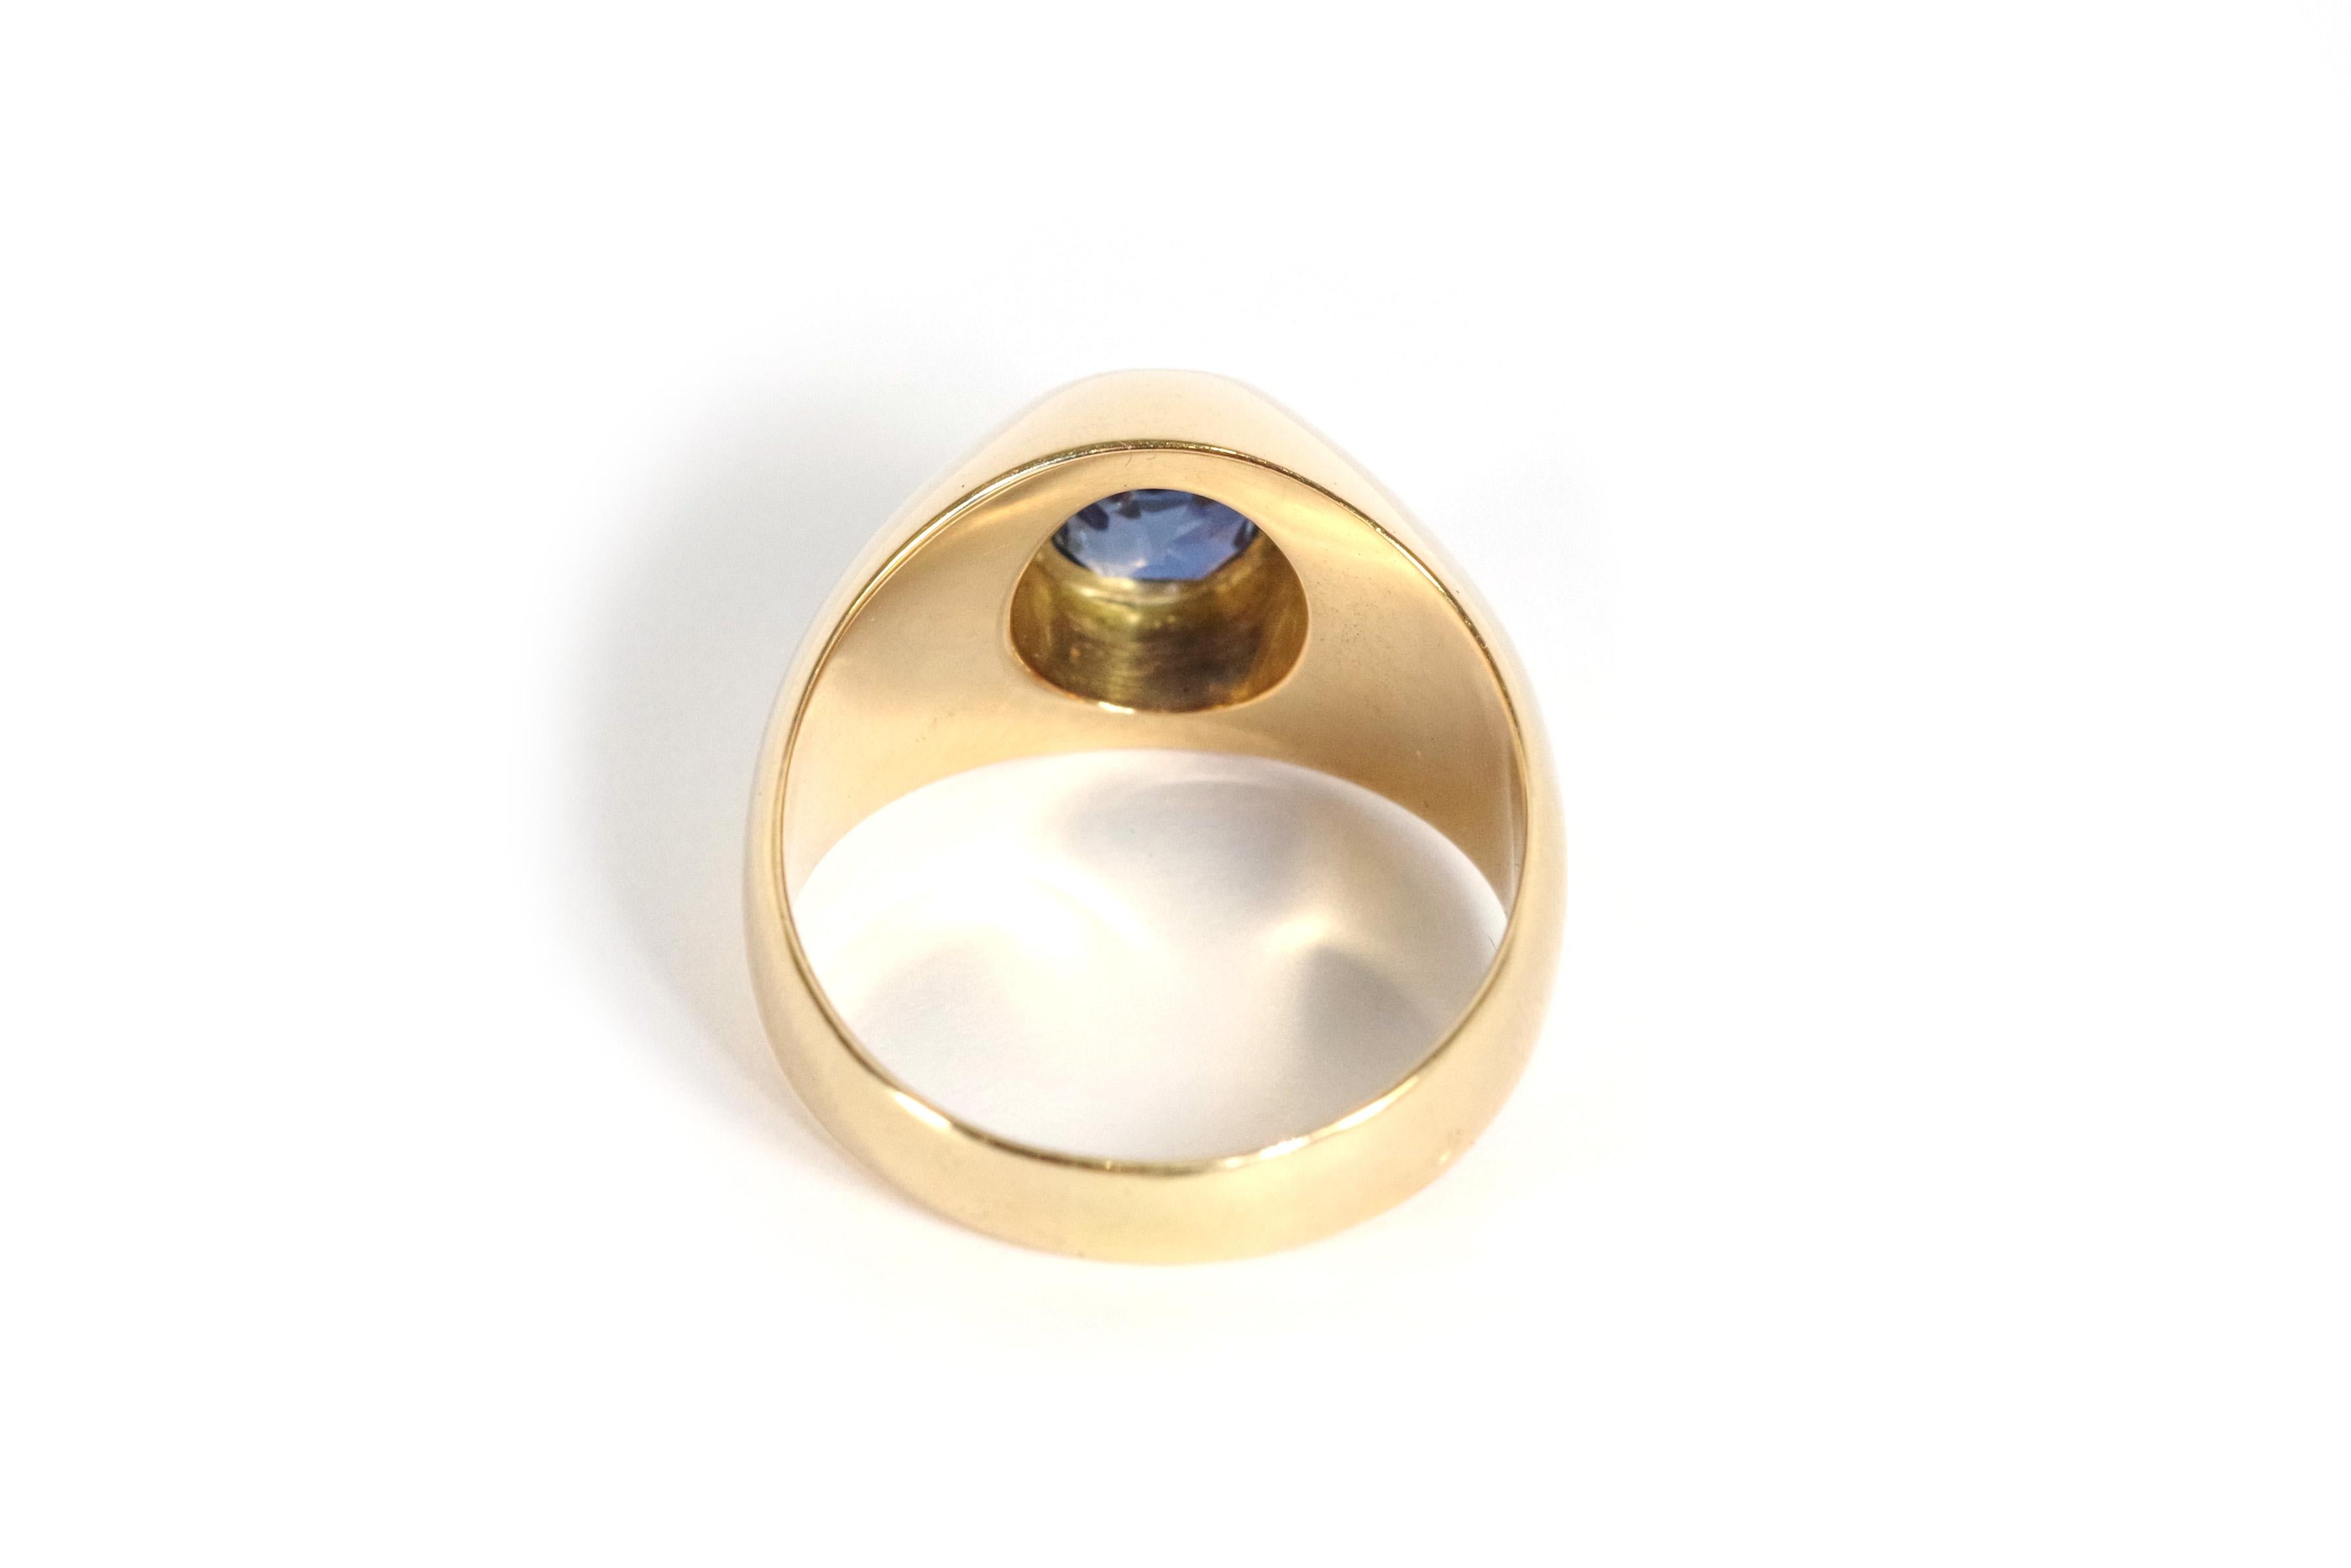 Post-War Sapphire band ring in 18 karat gold, blue sapphire For Sale